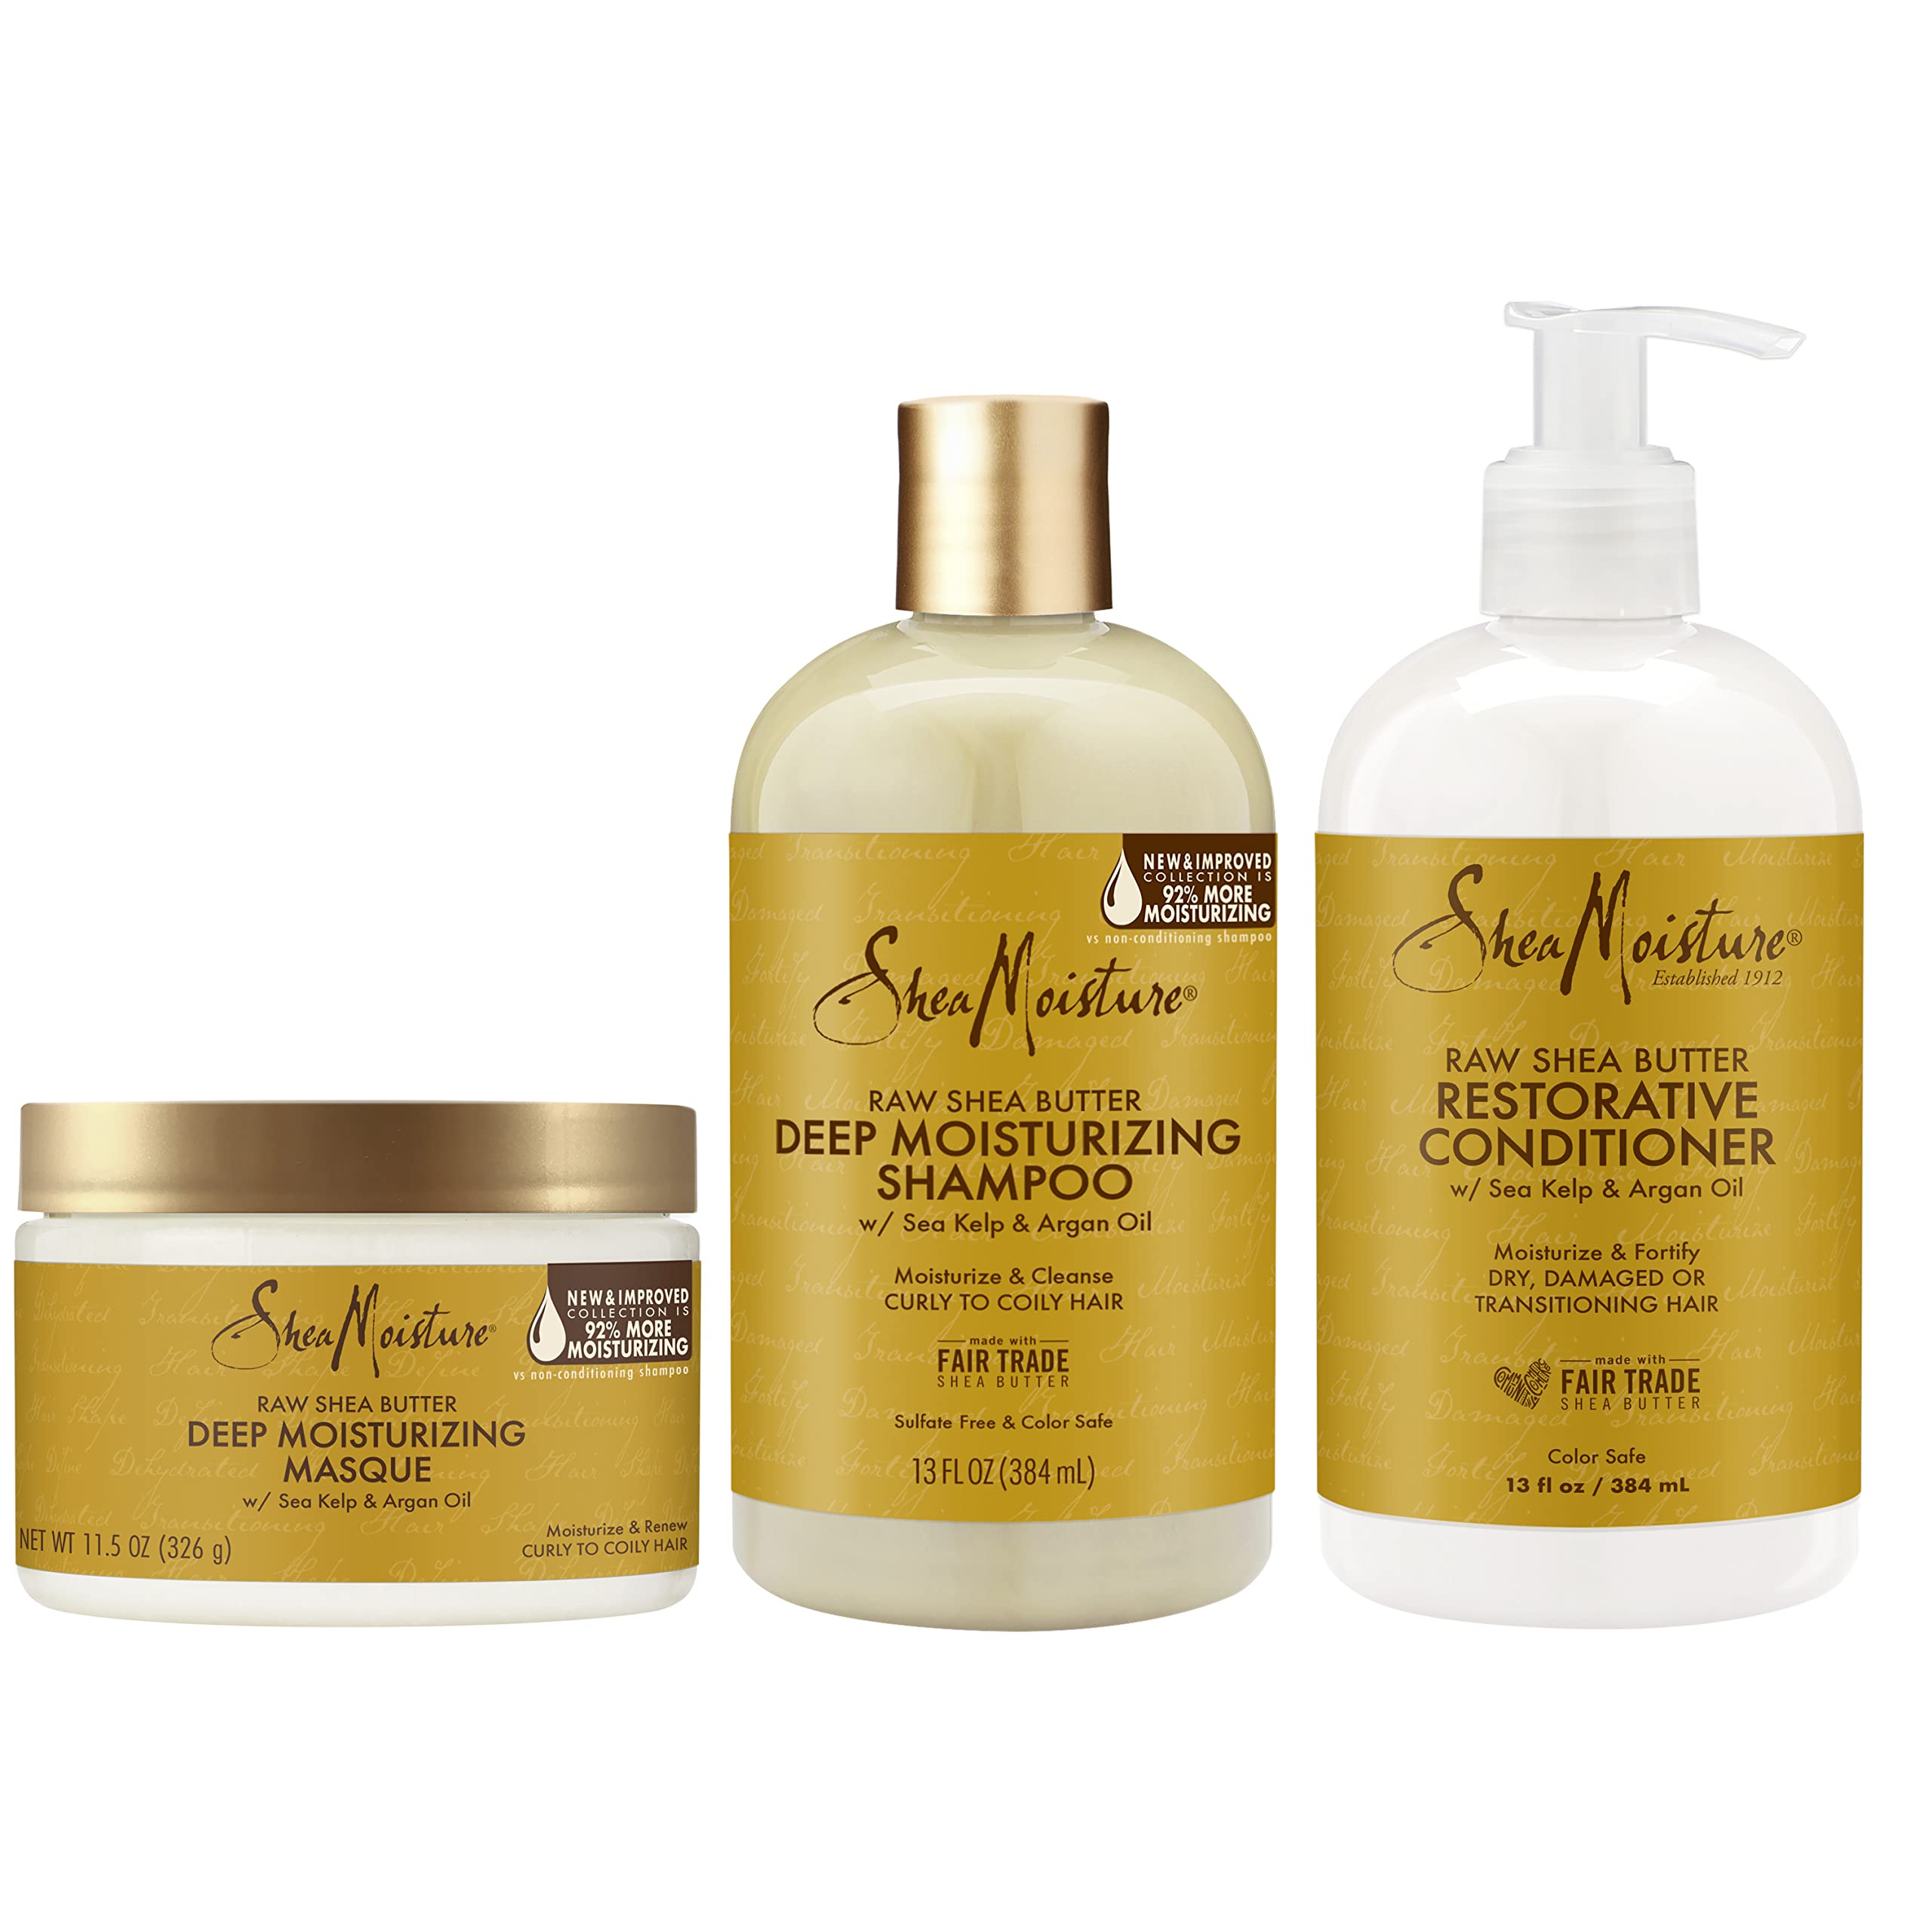 Looking to Buy Shea Moisture Products. Here Are 10 Considerations